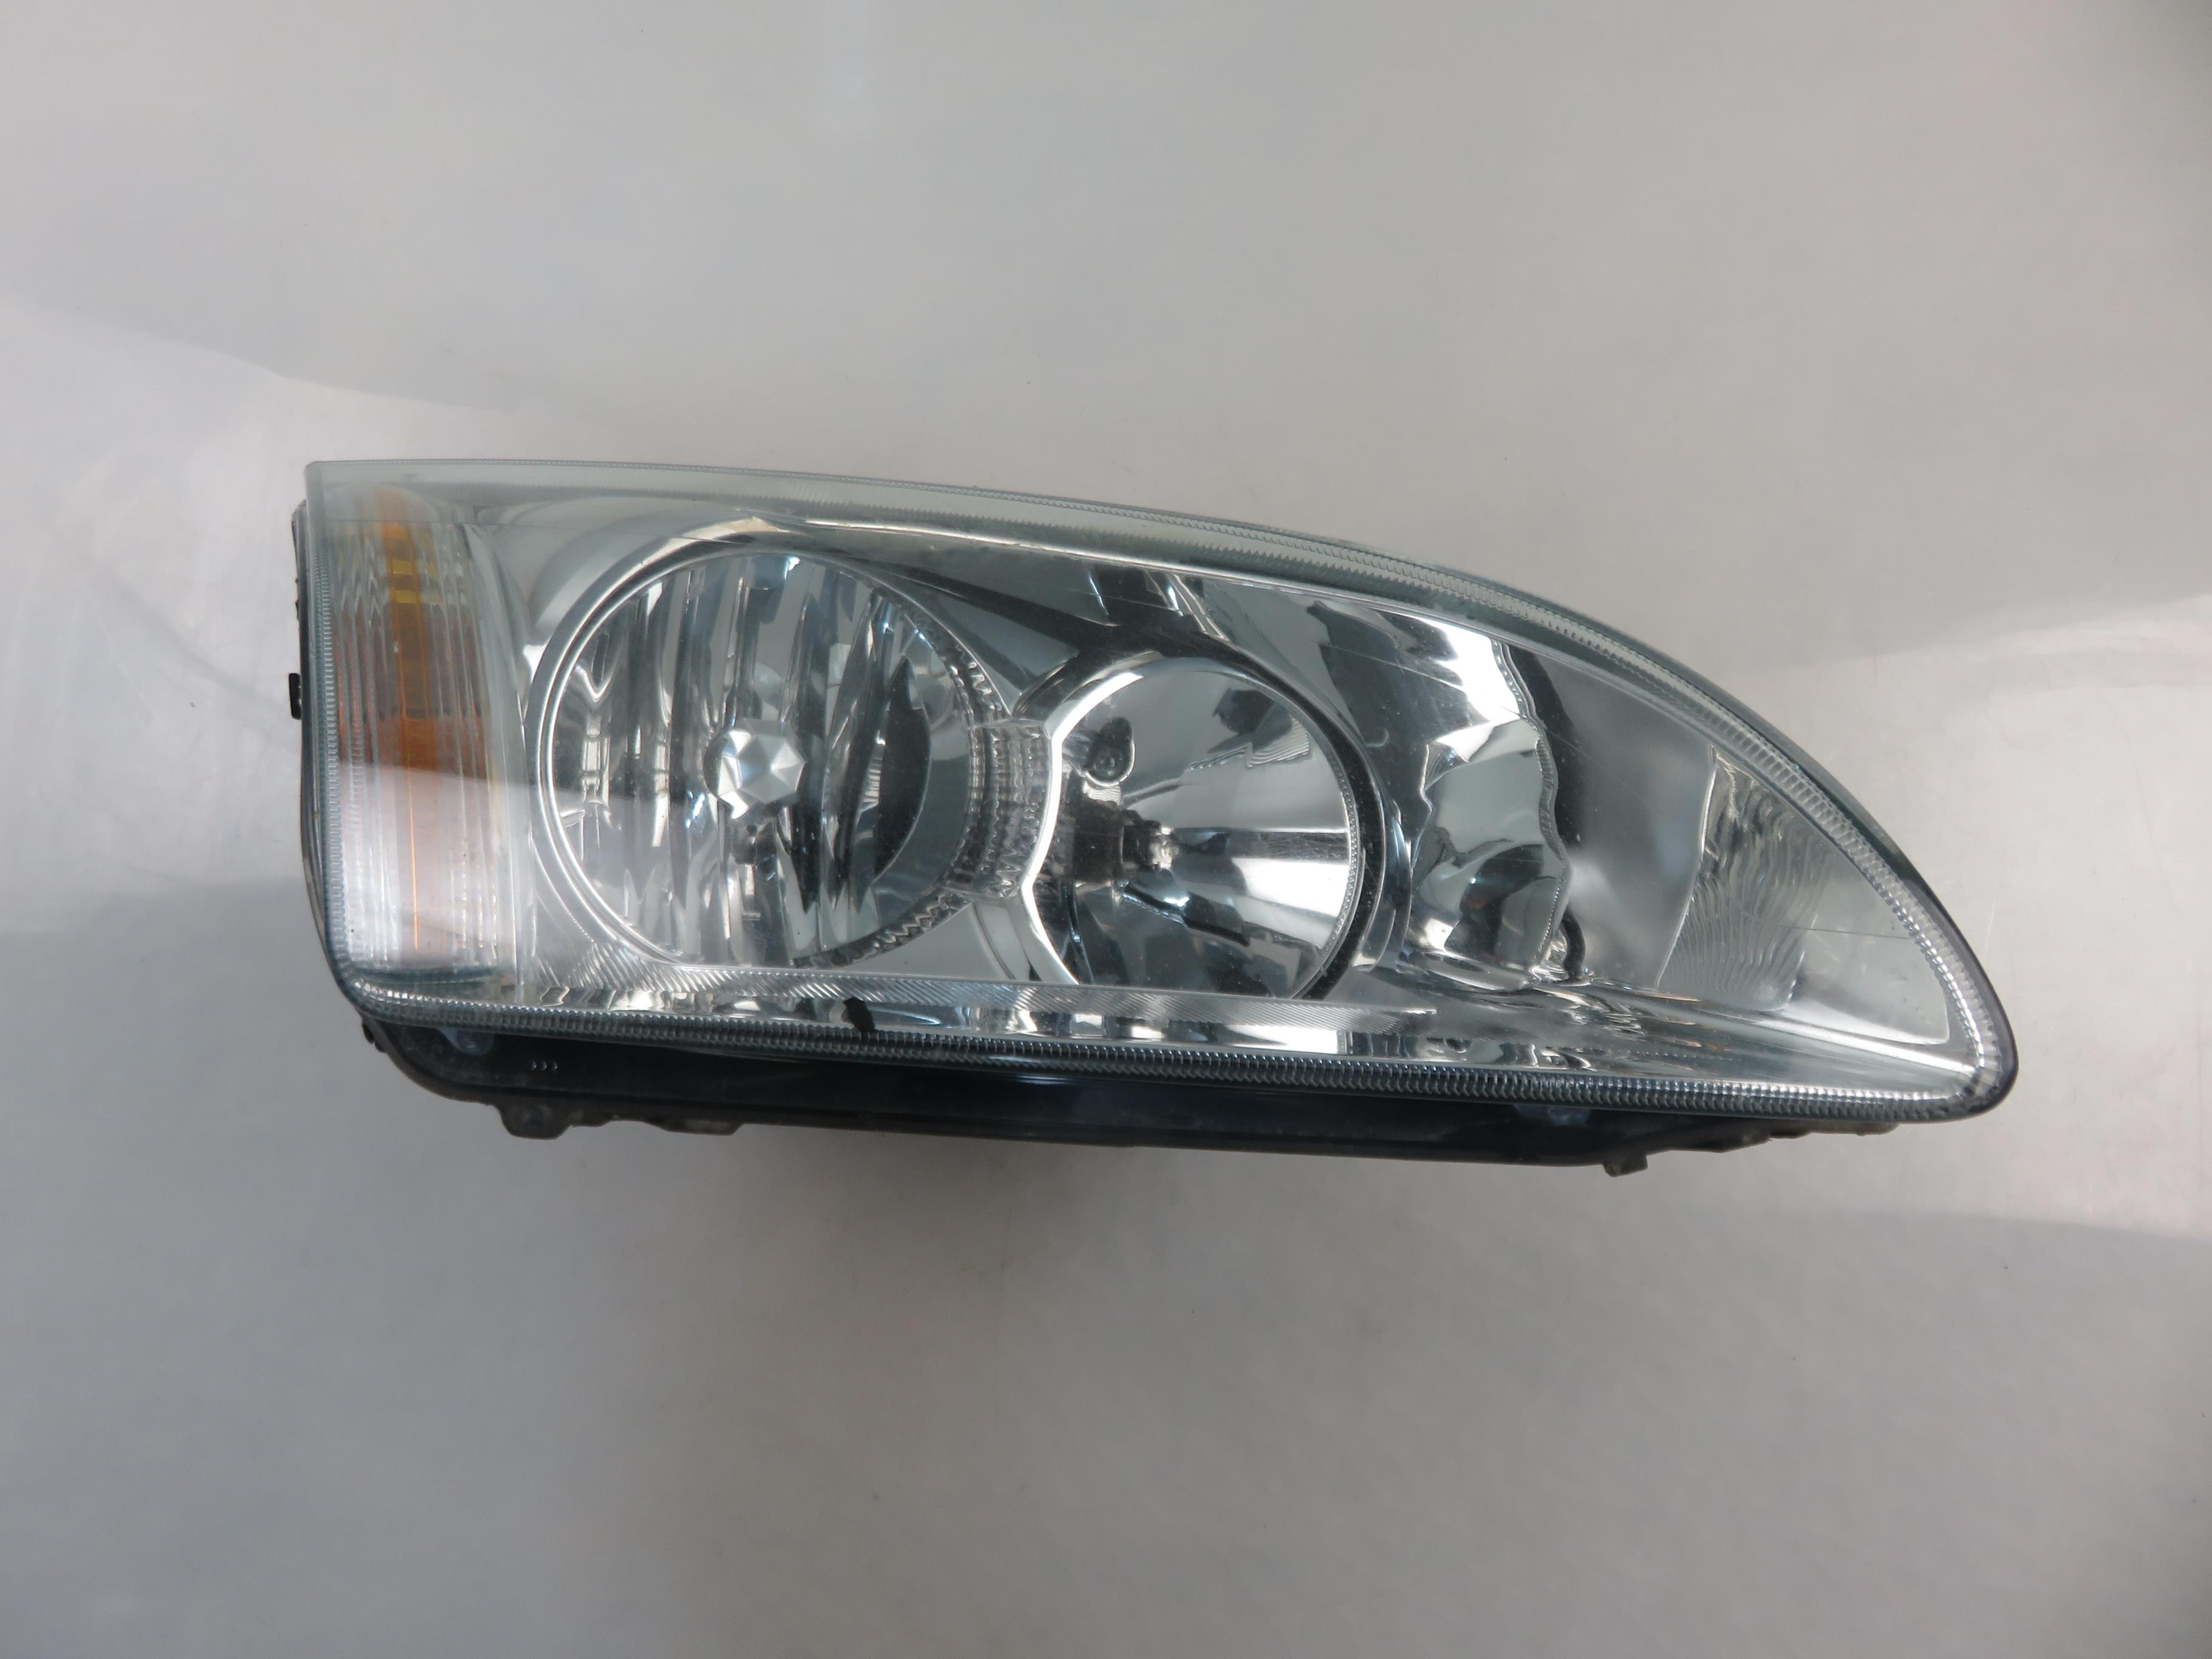 FORD Focus 2 generation (2004-2011) Front Left Headlight 4M5113W029AC 23564355